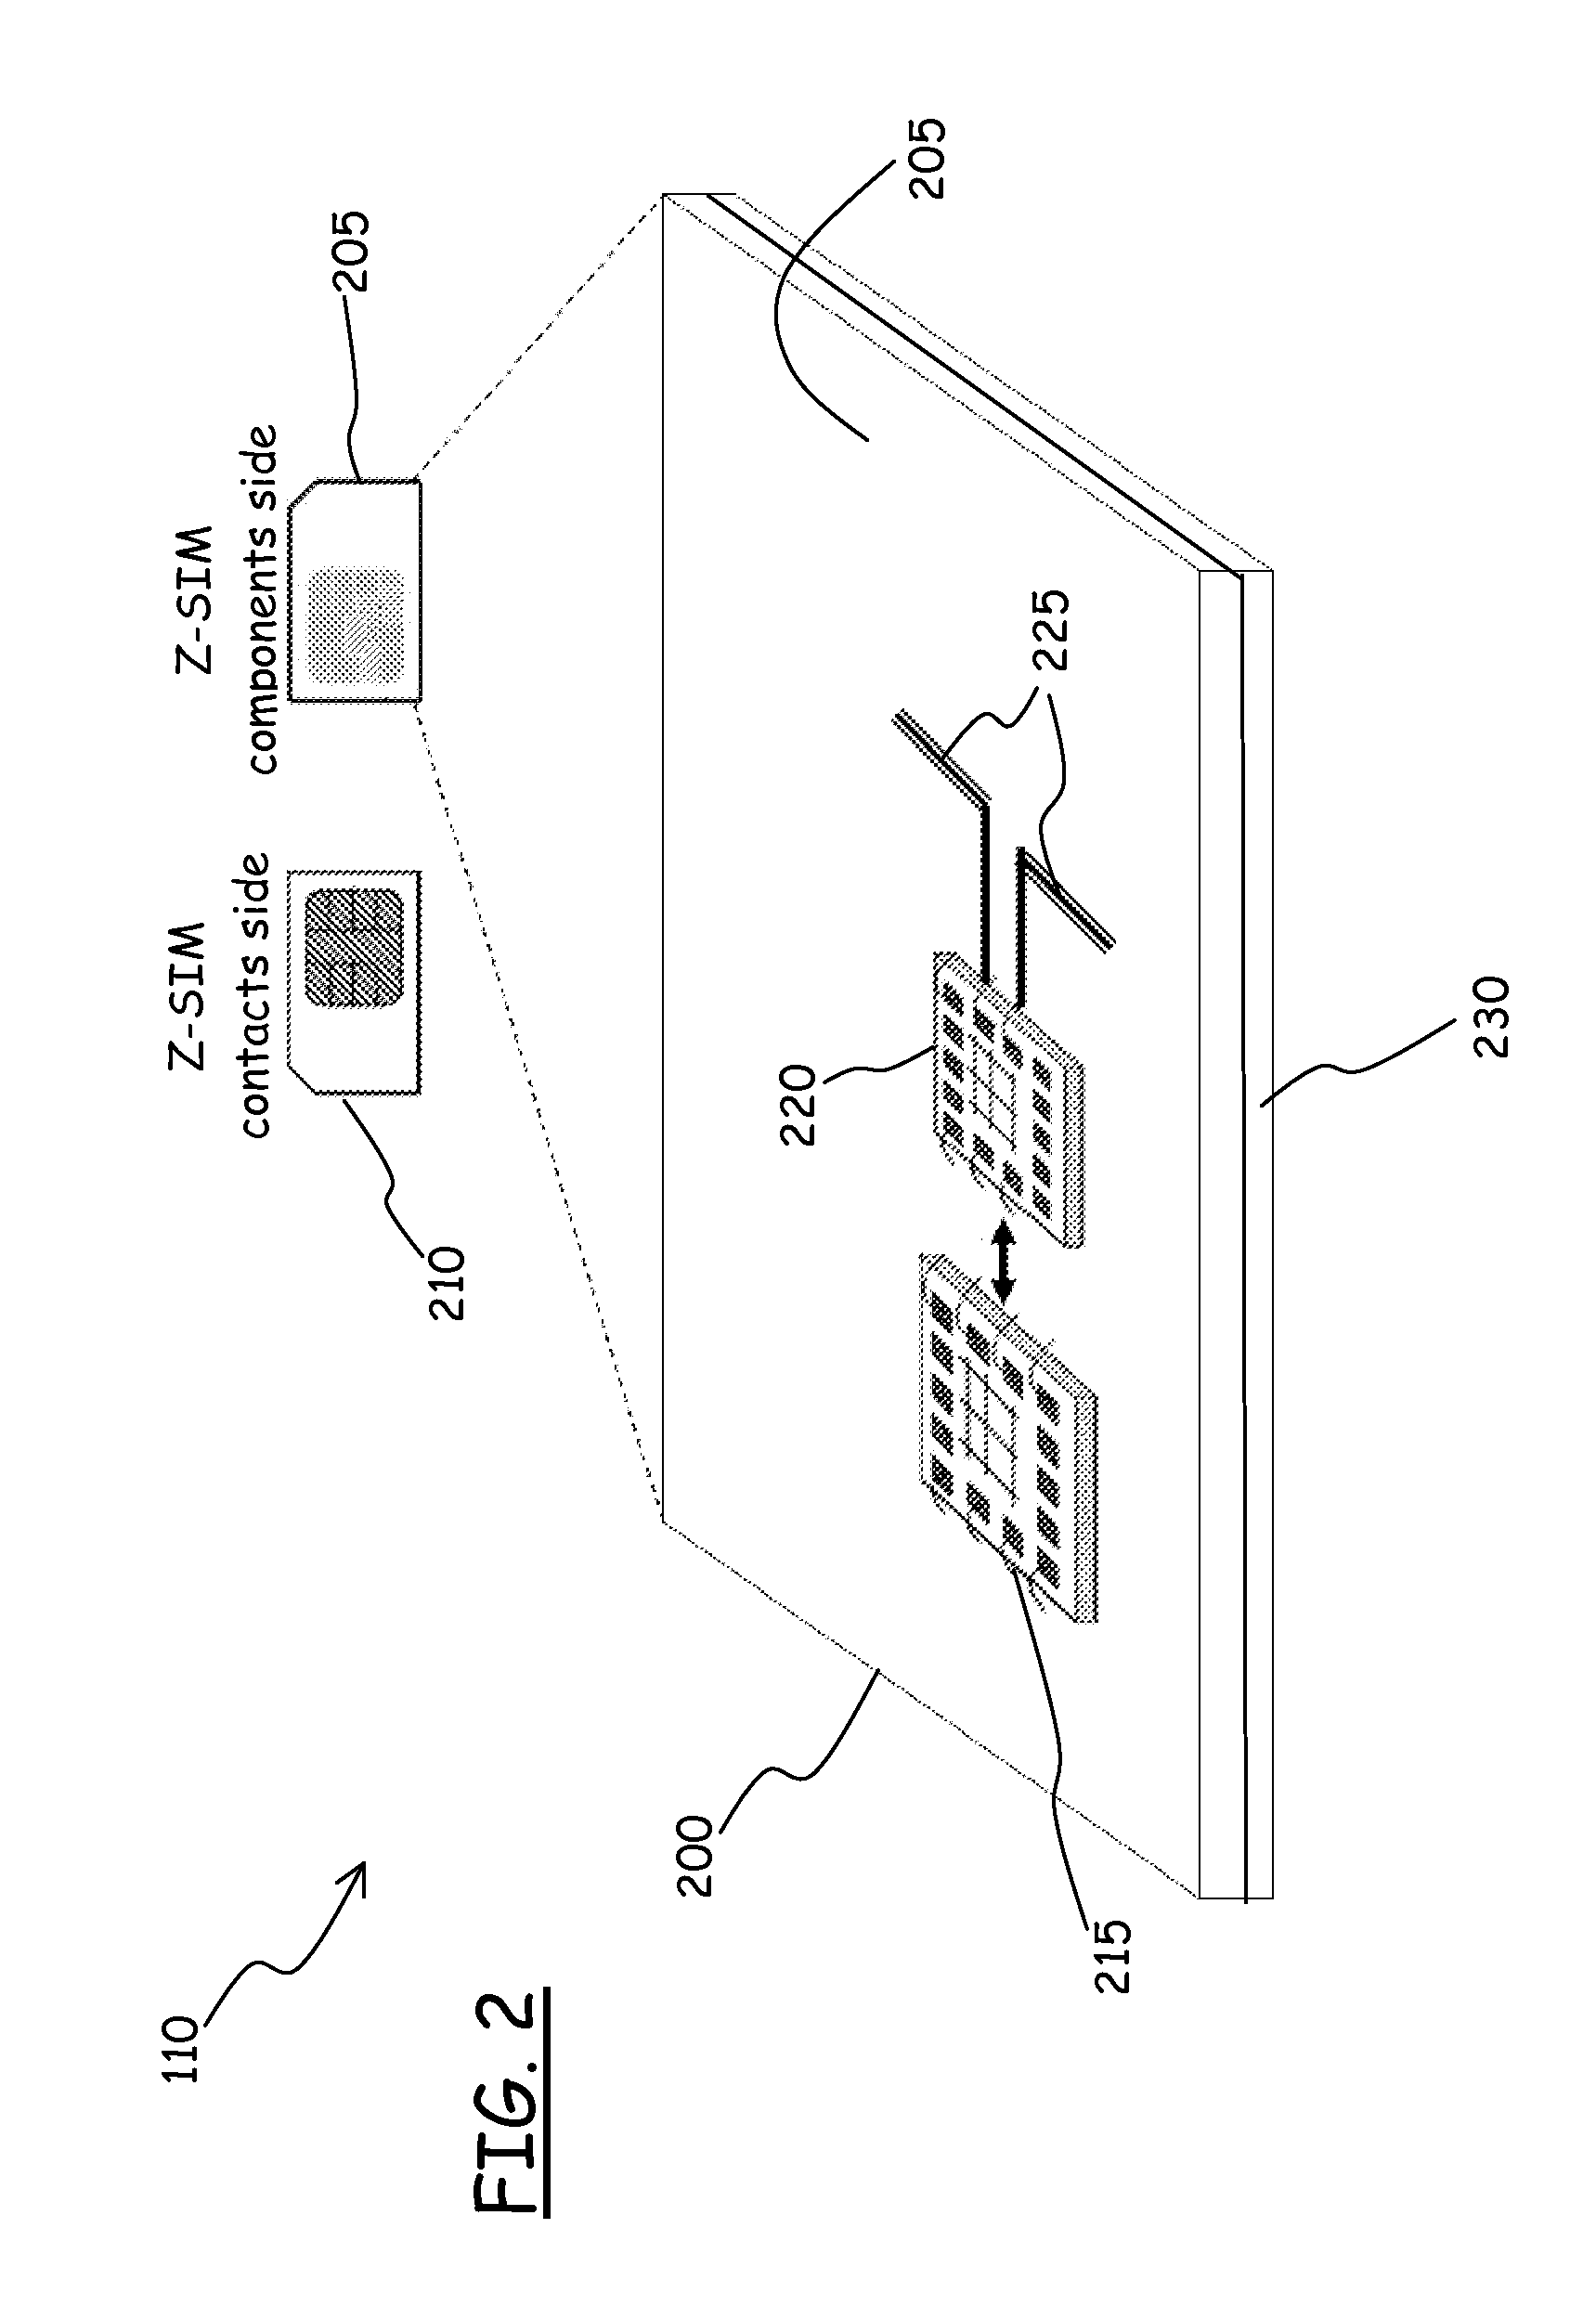 Radio Coverage Extender for a Personal Area Network Node Embedded in a User Communications Terminal